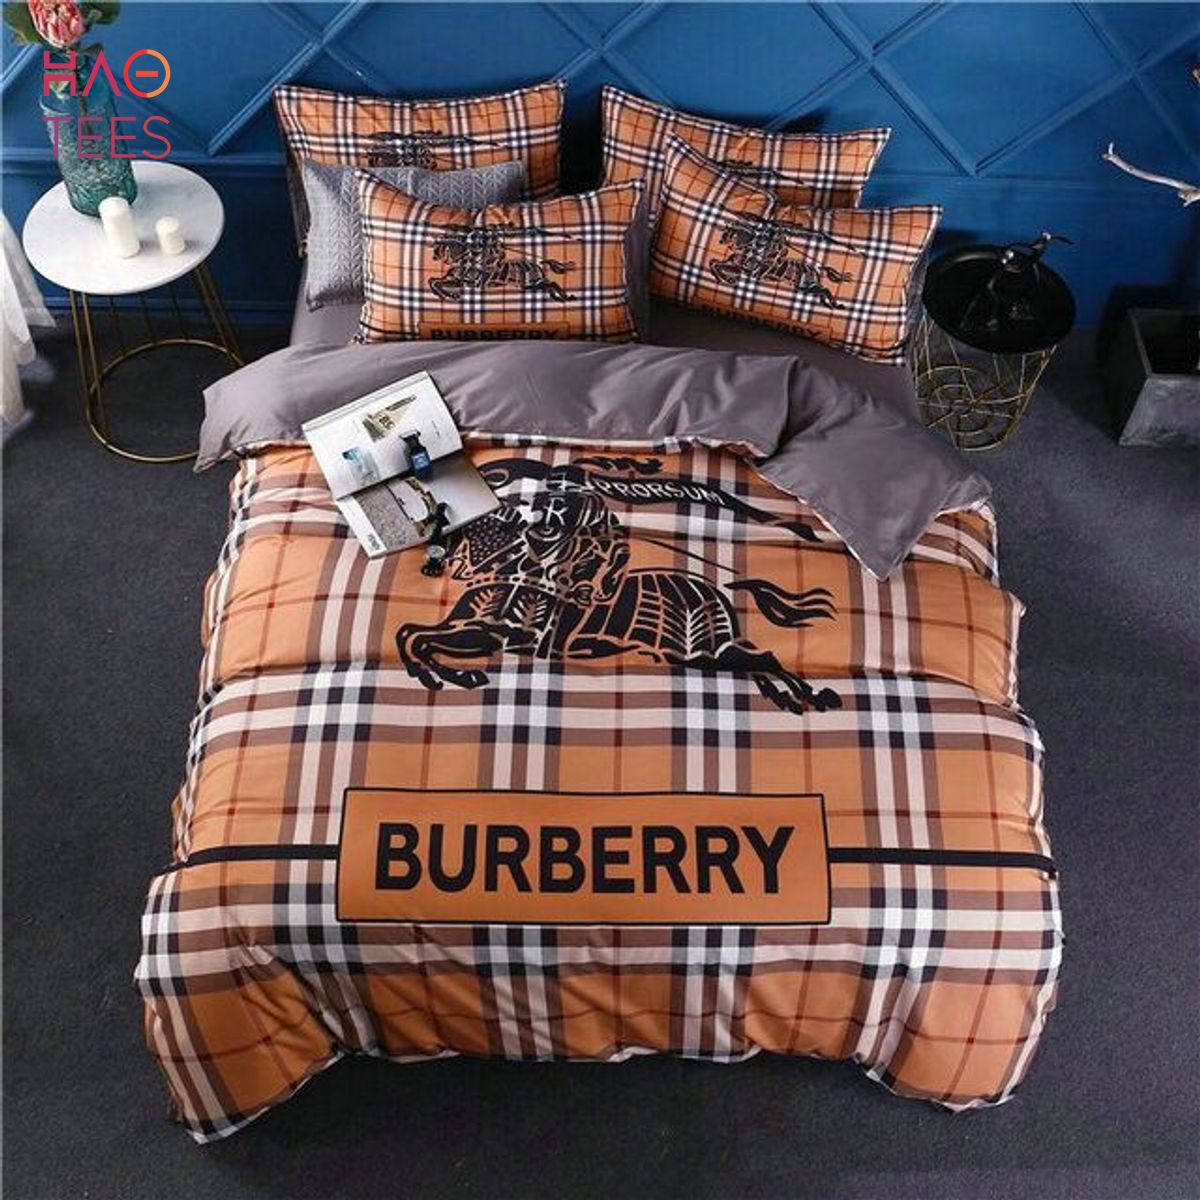 TREND Burberry London Luxury Brand Bedding Sets And Bedroom Sets